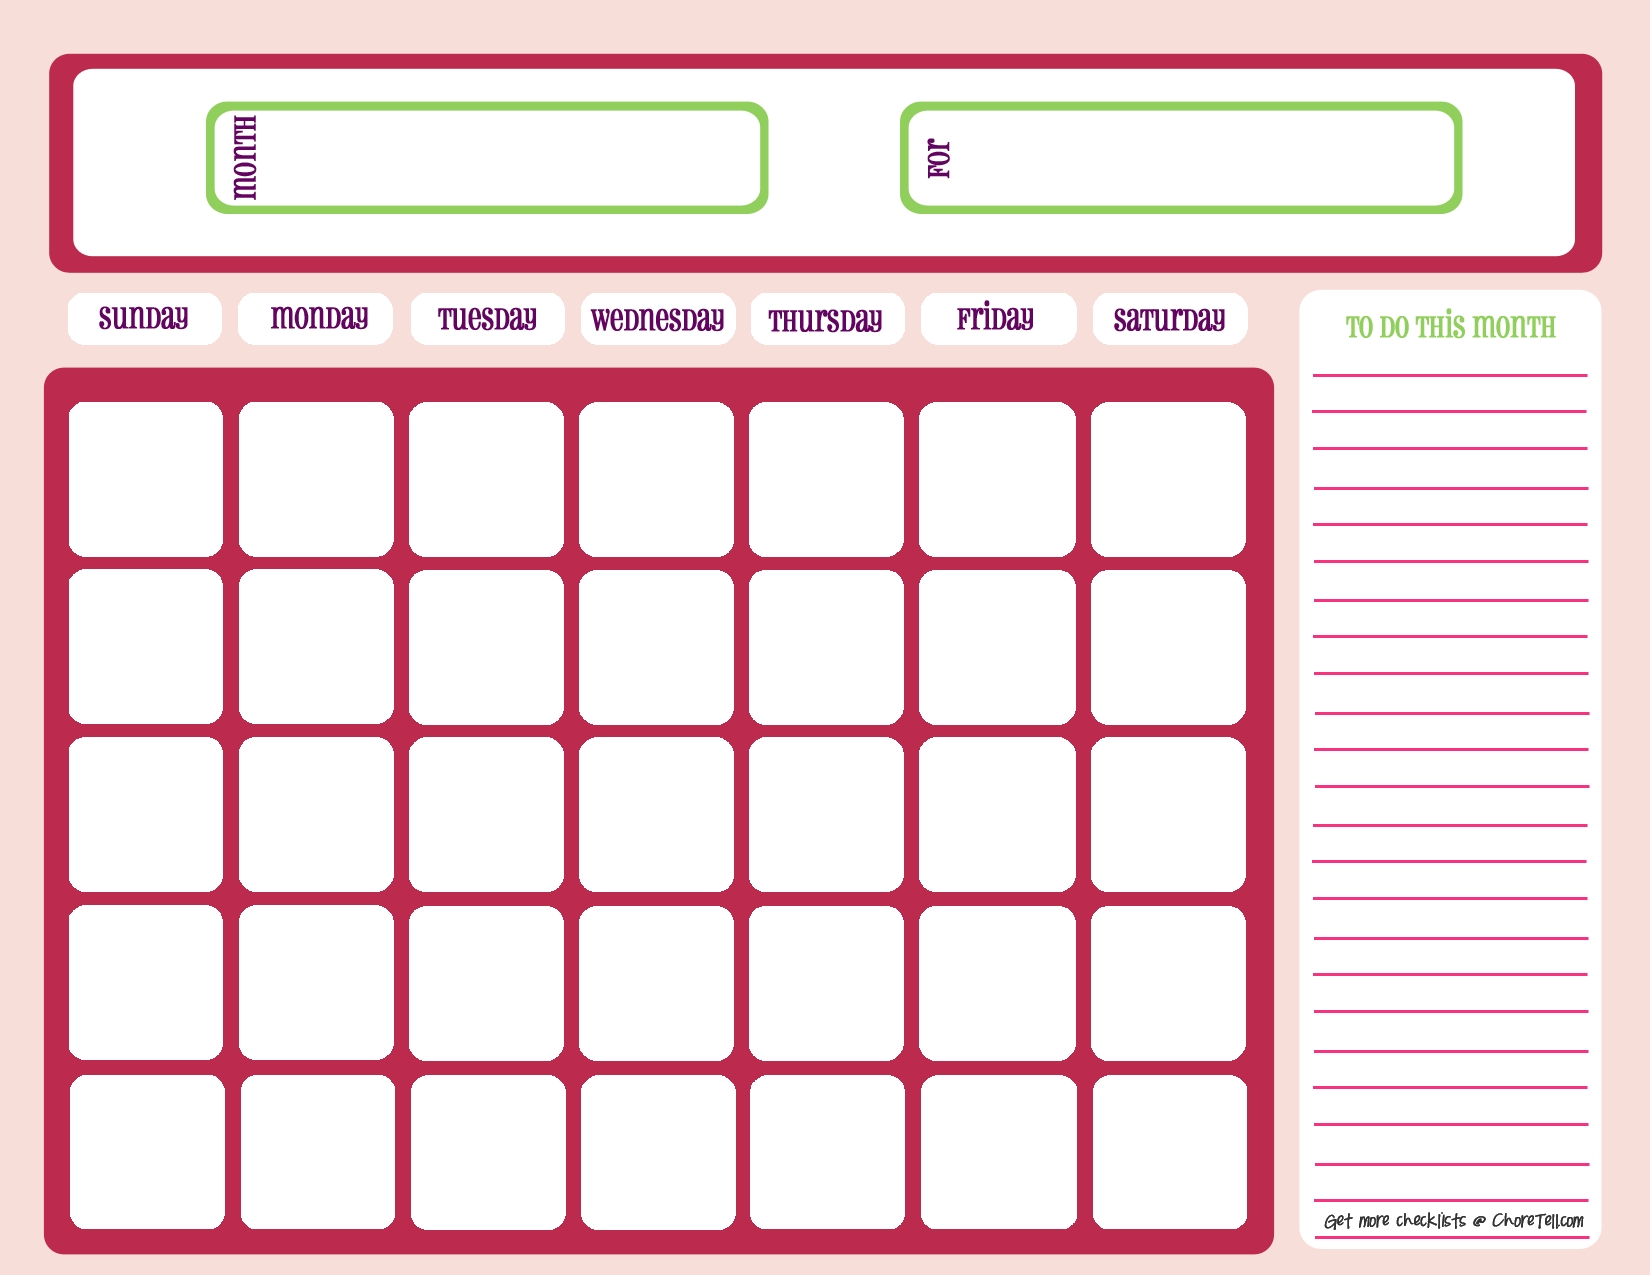 Blank Month Calendar - Pinks - Free Printable Downloads From Choretell intended for Full Page Monthly Calendar Printable